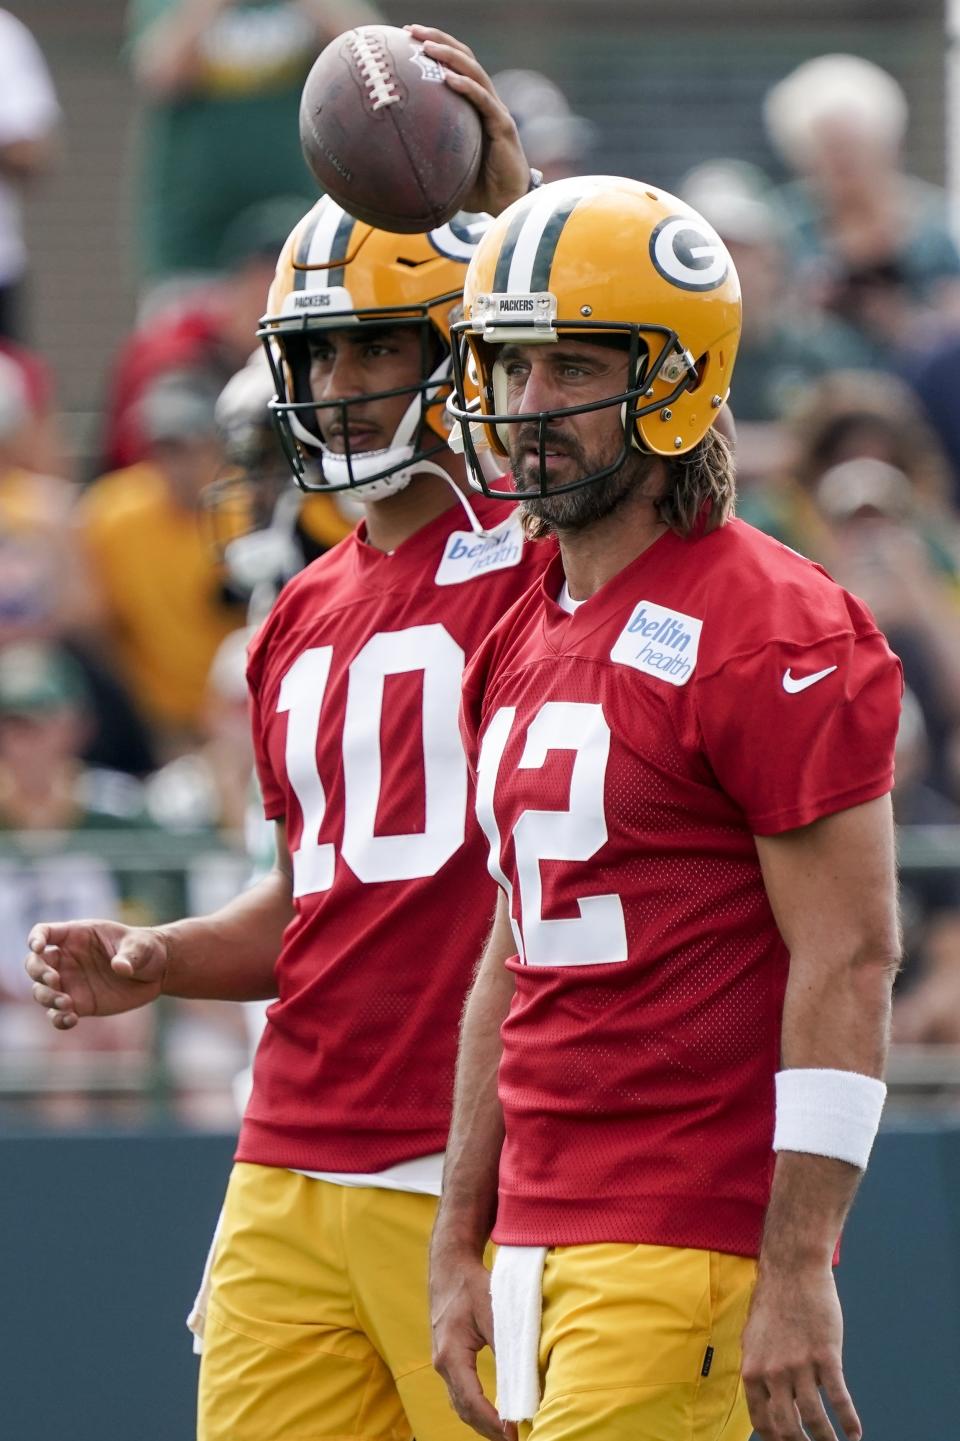 Green Bay Packers' Aaron Rodgers and Jordan Love run a drill at the NFL football team's practice field Wednesday, July 27, 2022, in Green Bay, Wis. (AP Photo/Morry Gash)